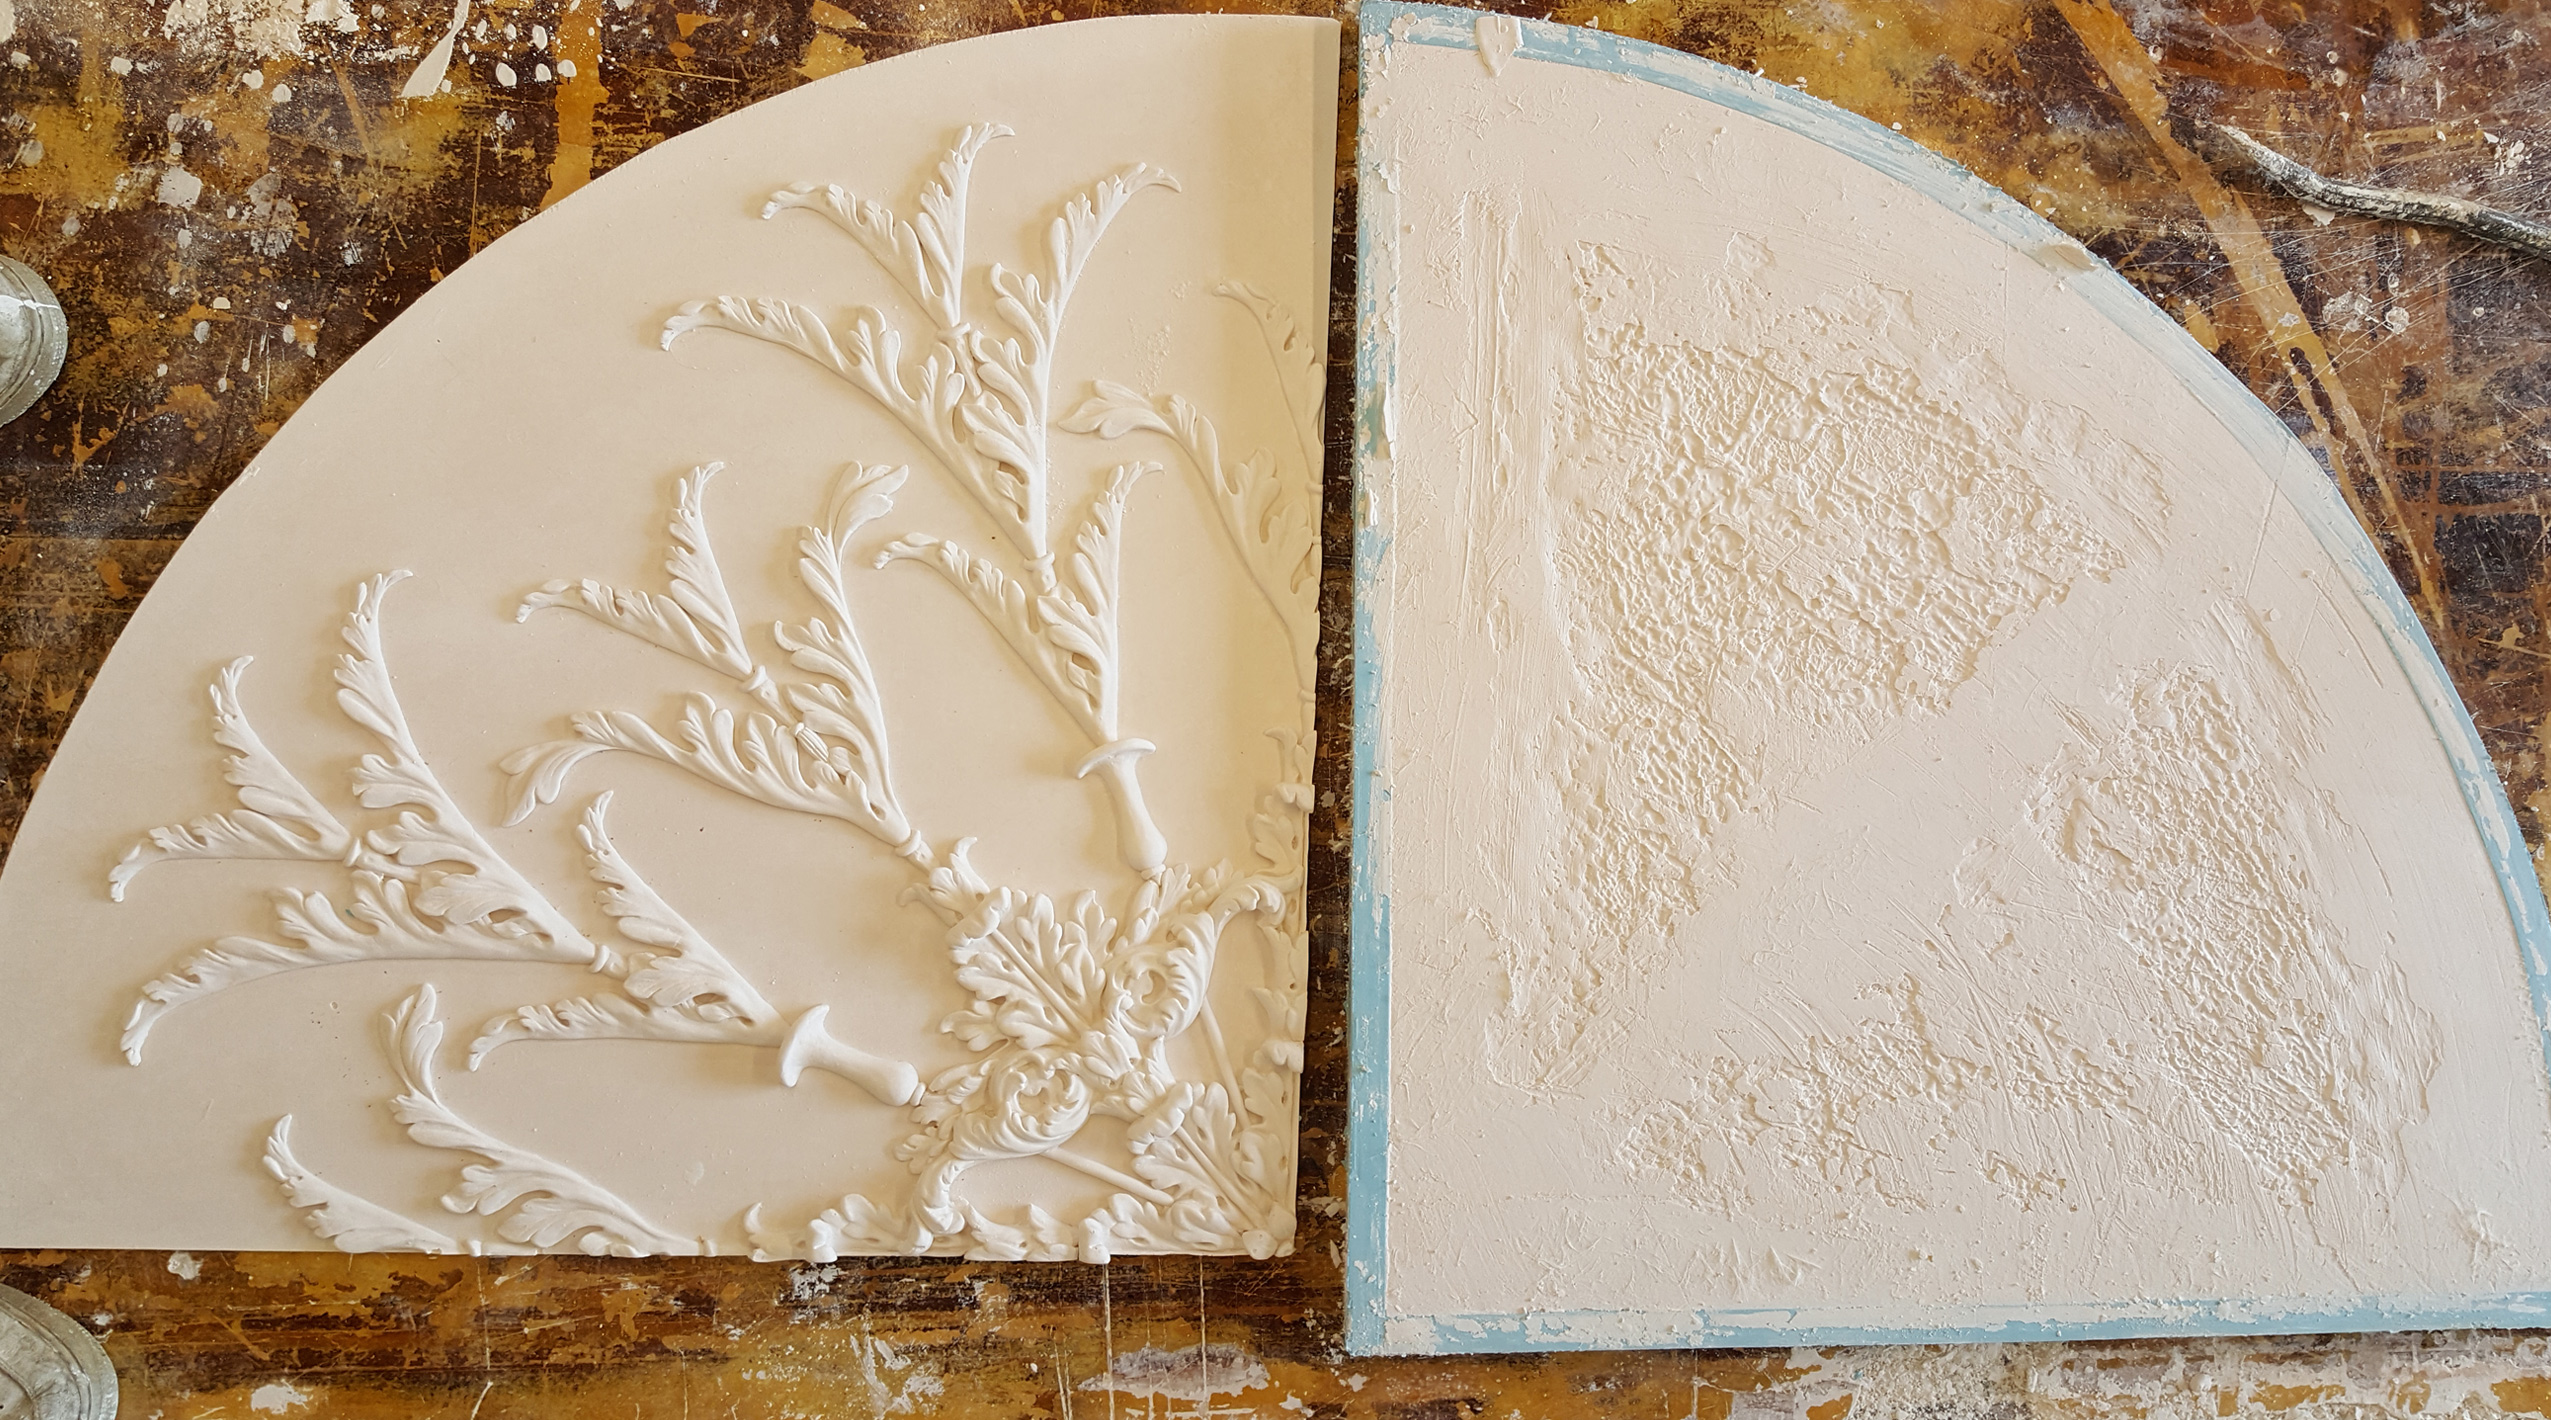 Traditional Fibrous Plaster Casting Process from a Bespoke Silicon Ceiling Panel Mould